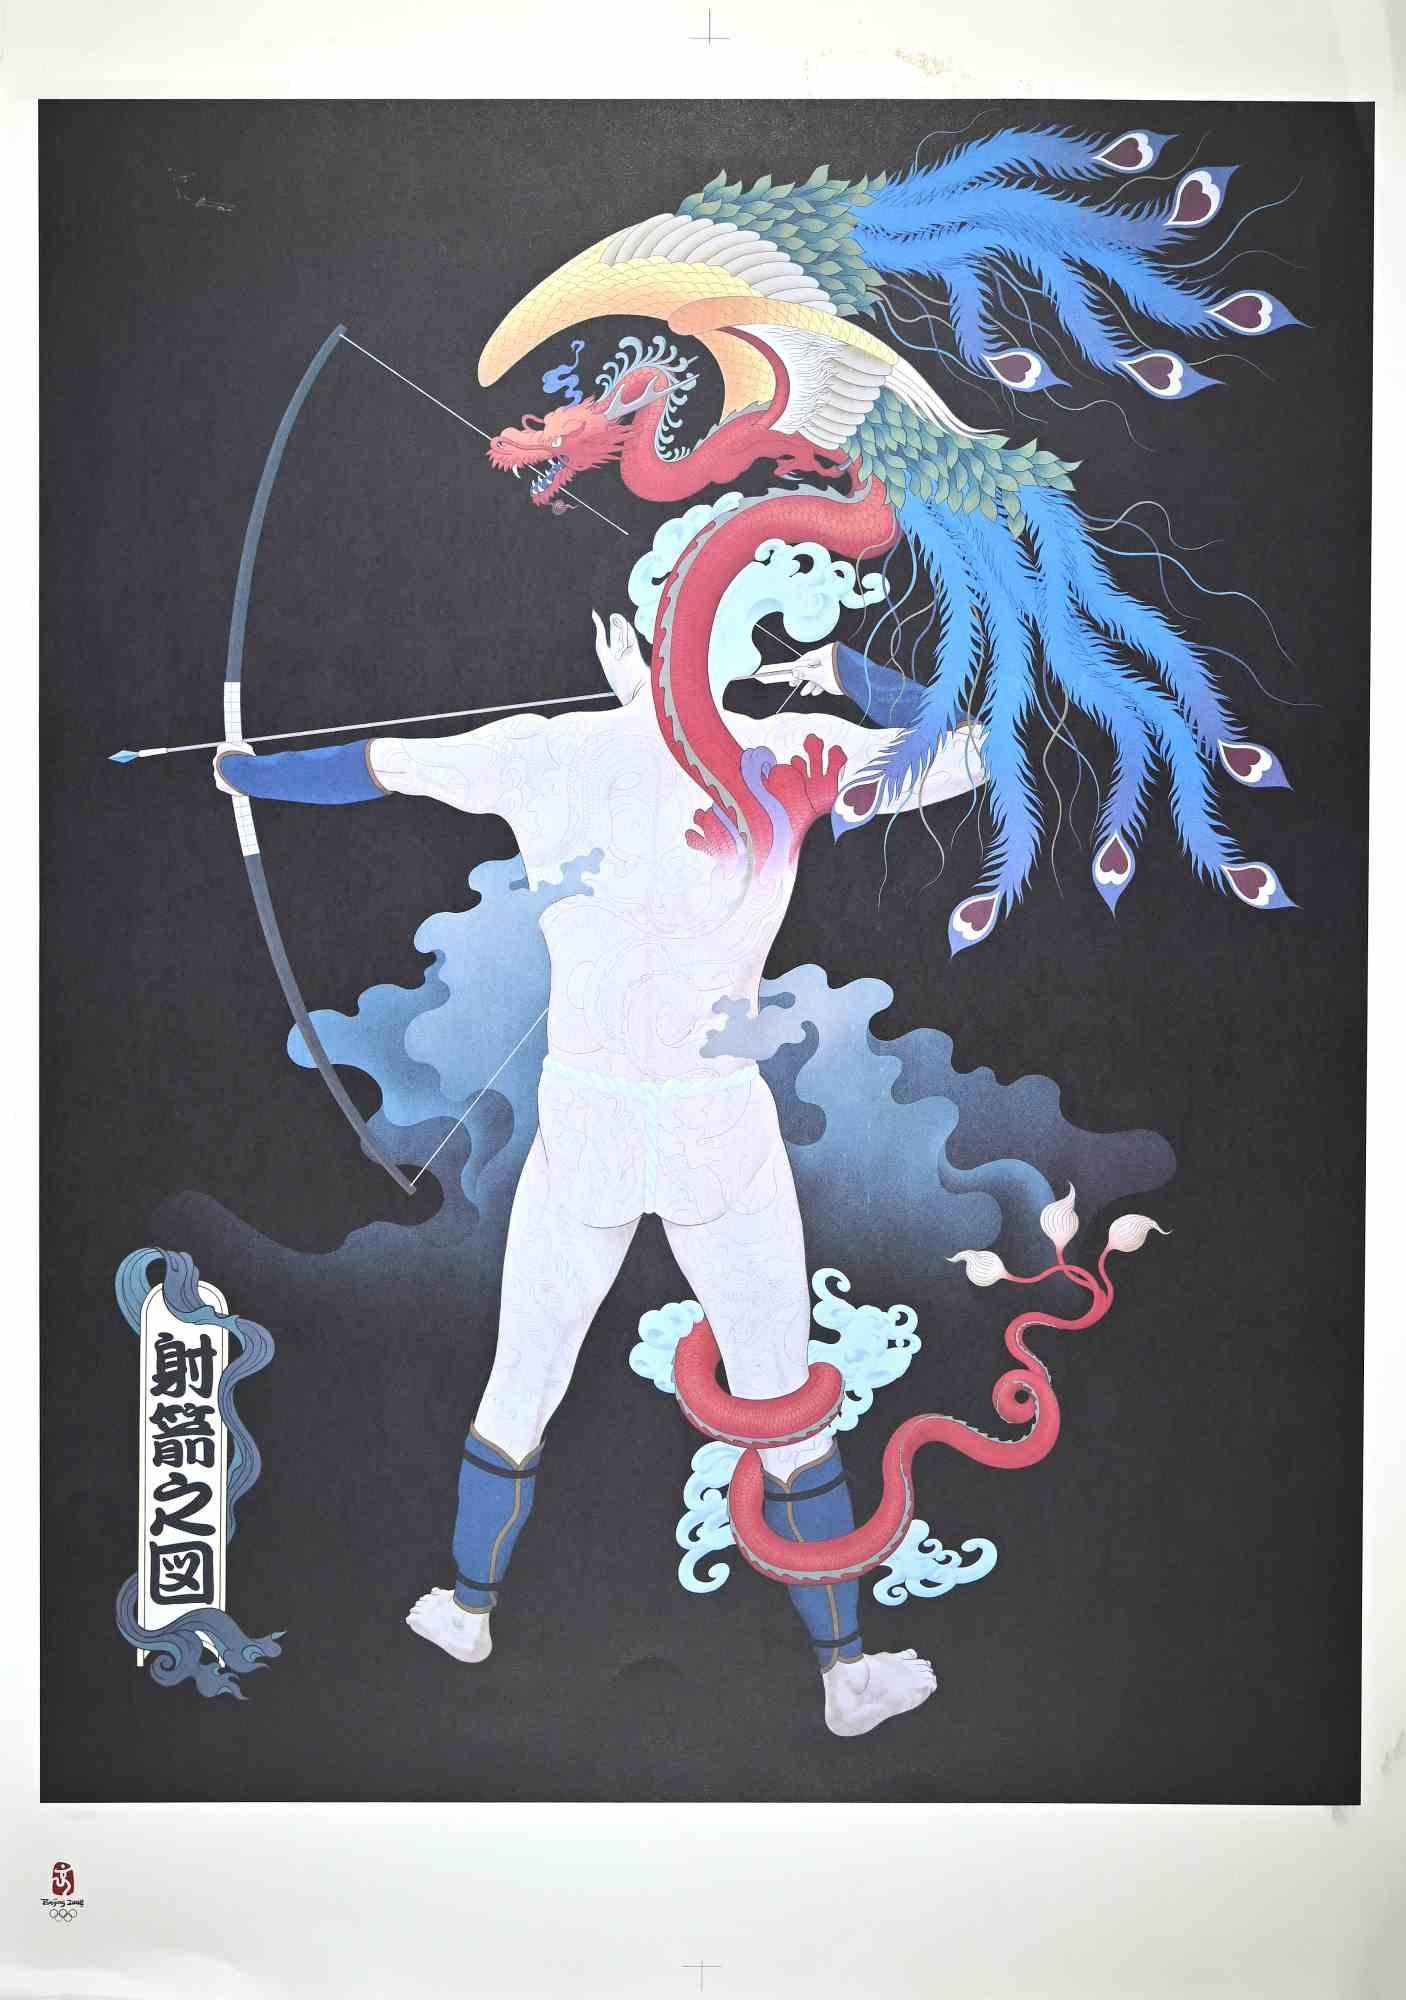 Unknown Figurative Print - Archer and Dragon (Olympic Games)  - Original Lithograph - 2008  